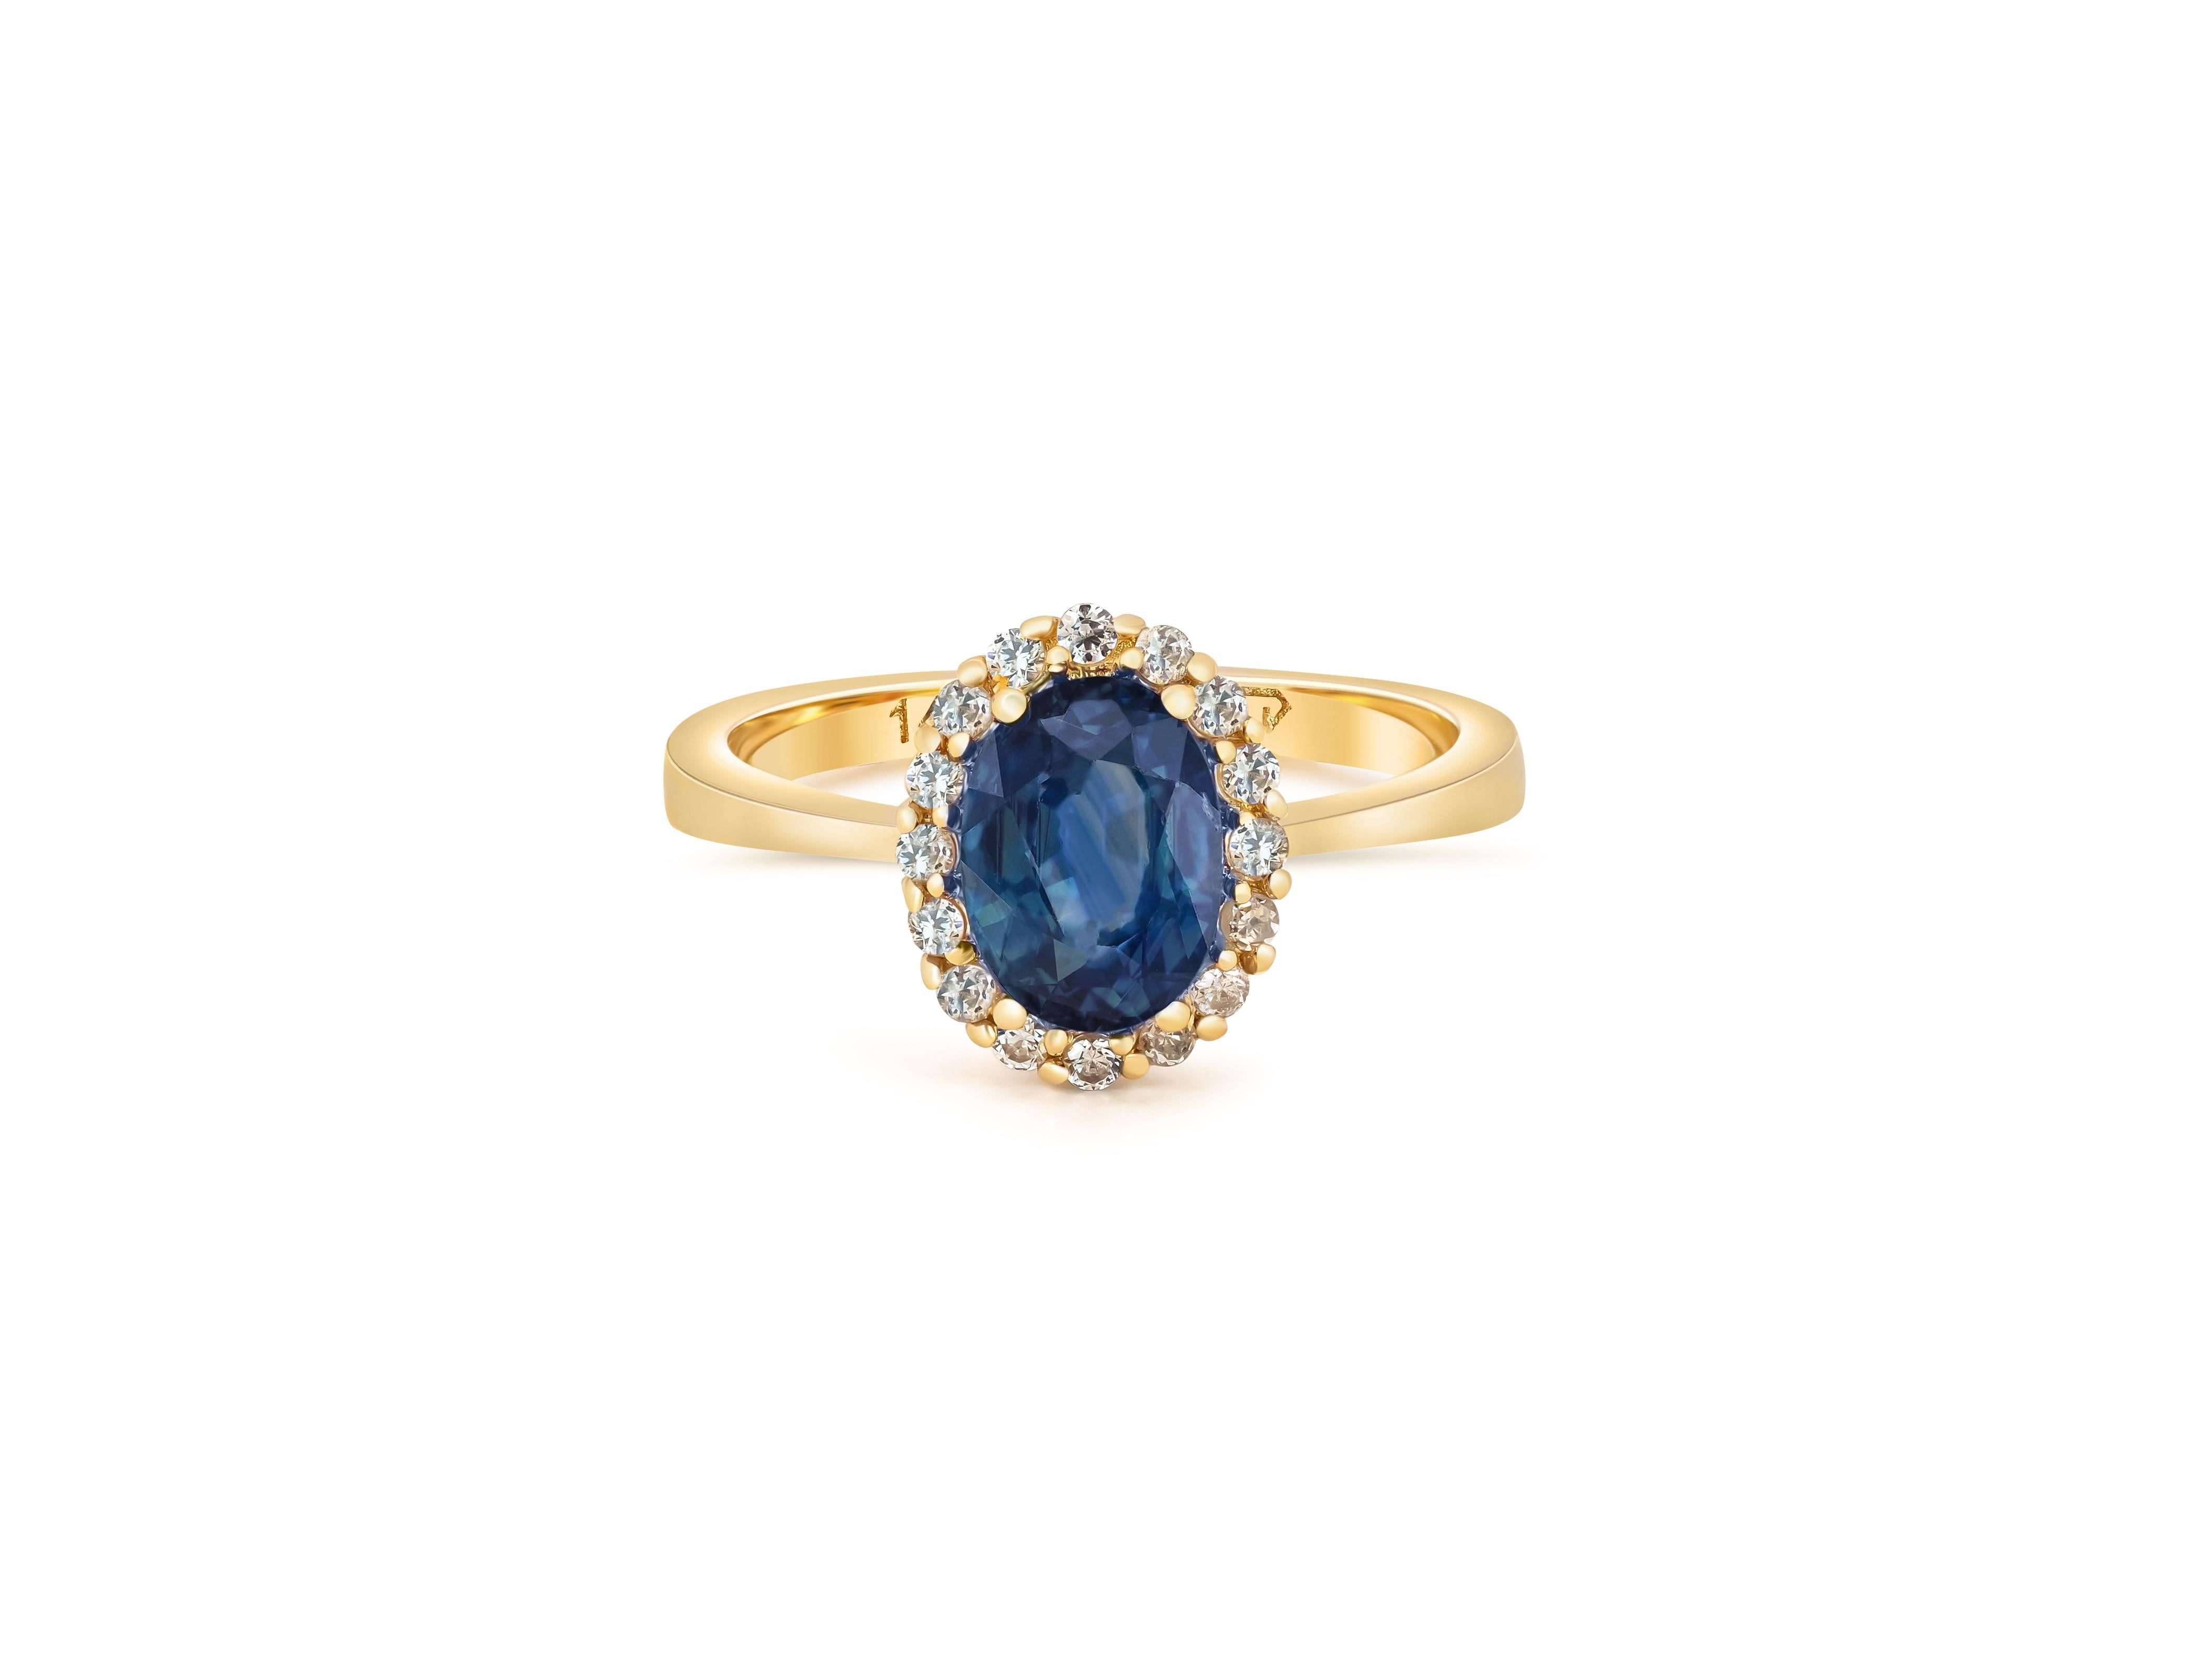 Sapphire ring with diamond halo. Oval sapphire, diamonds 14k gold. Sapphire engagement ring. September birthstone ring. Classic sapphire ring. Genuine sapphire ring By Daizy Jewellery.

Metal stamp: 14k Gold
Weight: 2-2.3 gr (depends from